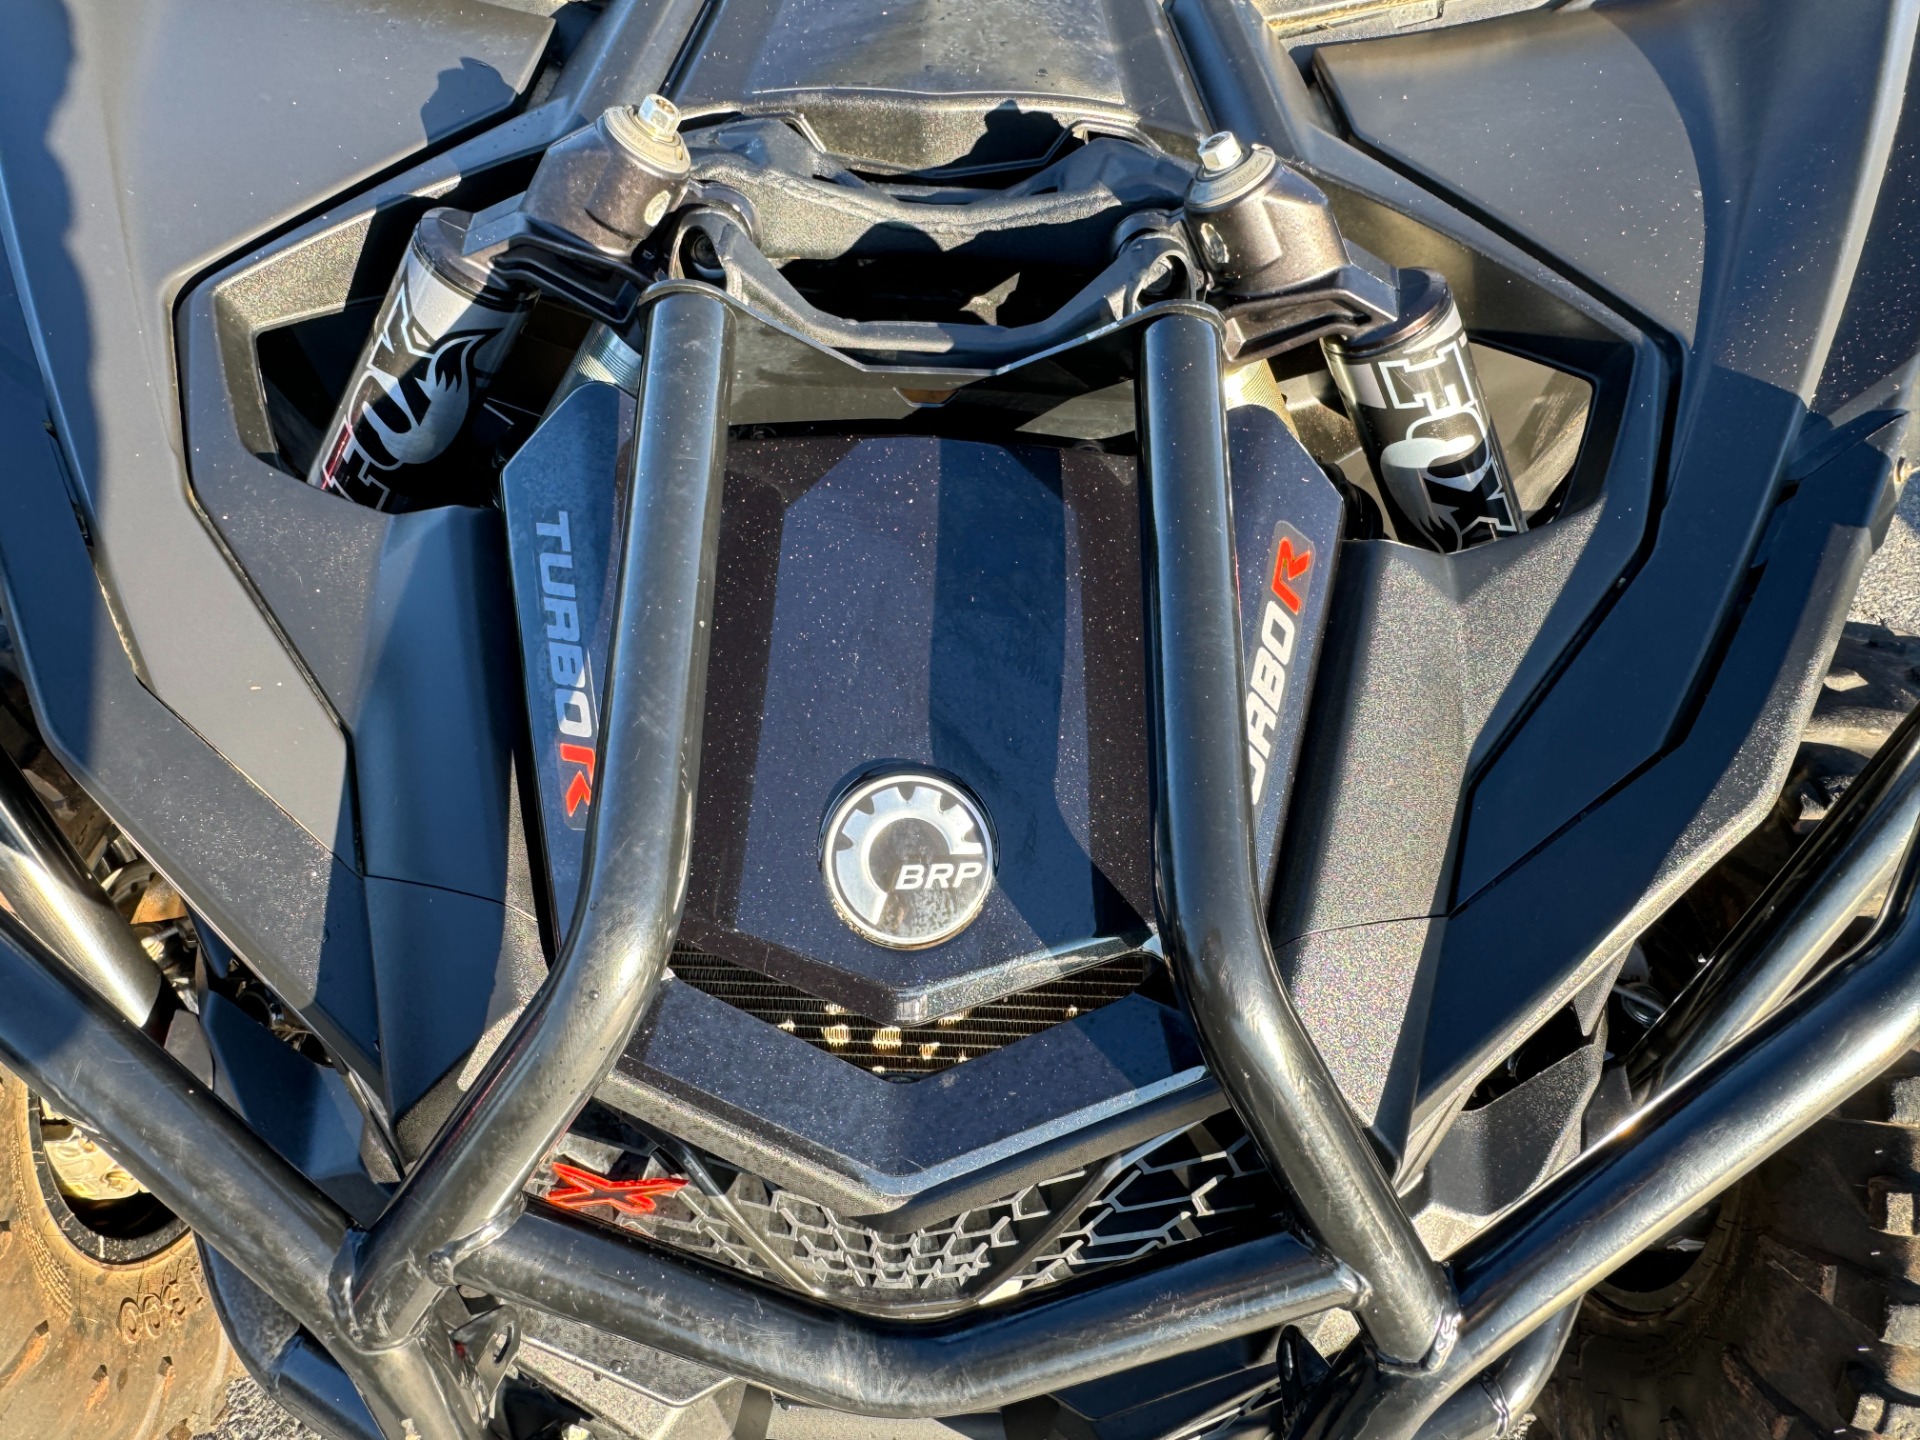 Used 2019 Can-Am Maverick Max XDS 1000 Turbo LIGHTBARS / SOUND SYSTEM / CB RADIO / WHEELS & TIRES for sale $29,500 at Formula Imports in Charlotte NC 28227 19